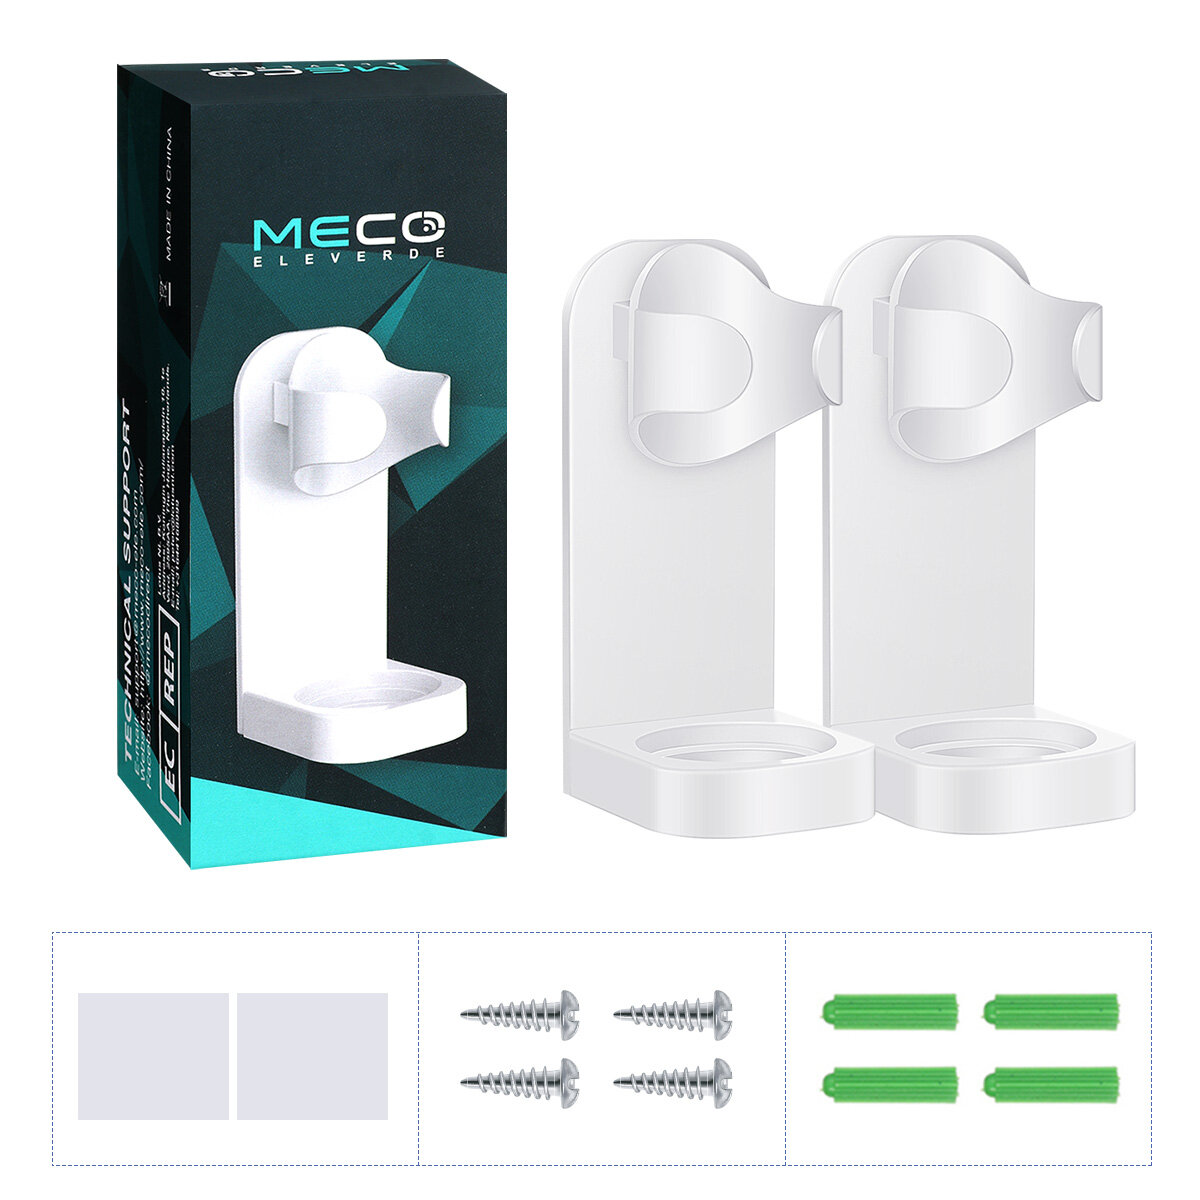 

MECO ELEVERDE 2Pcs Creative Traceless Stand Rack Toothbrush Organizer Electric Toothbrush Wall-Mounted Holder Space Savi